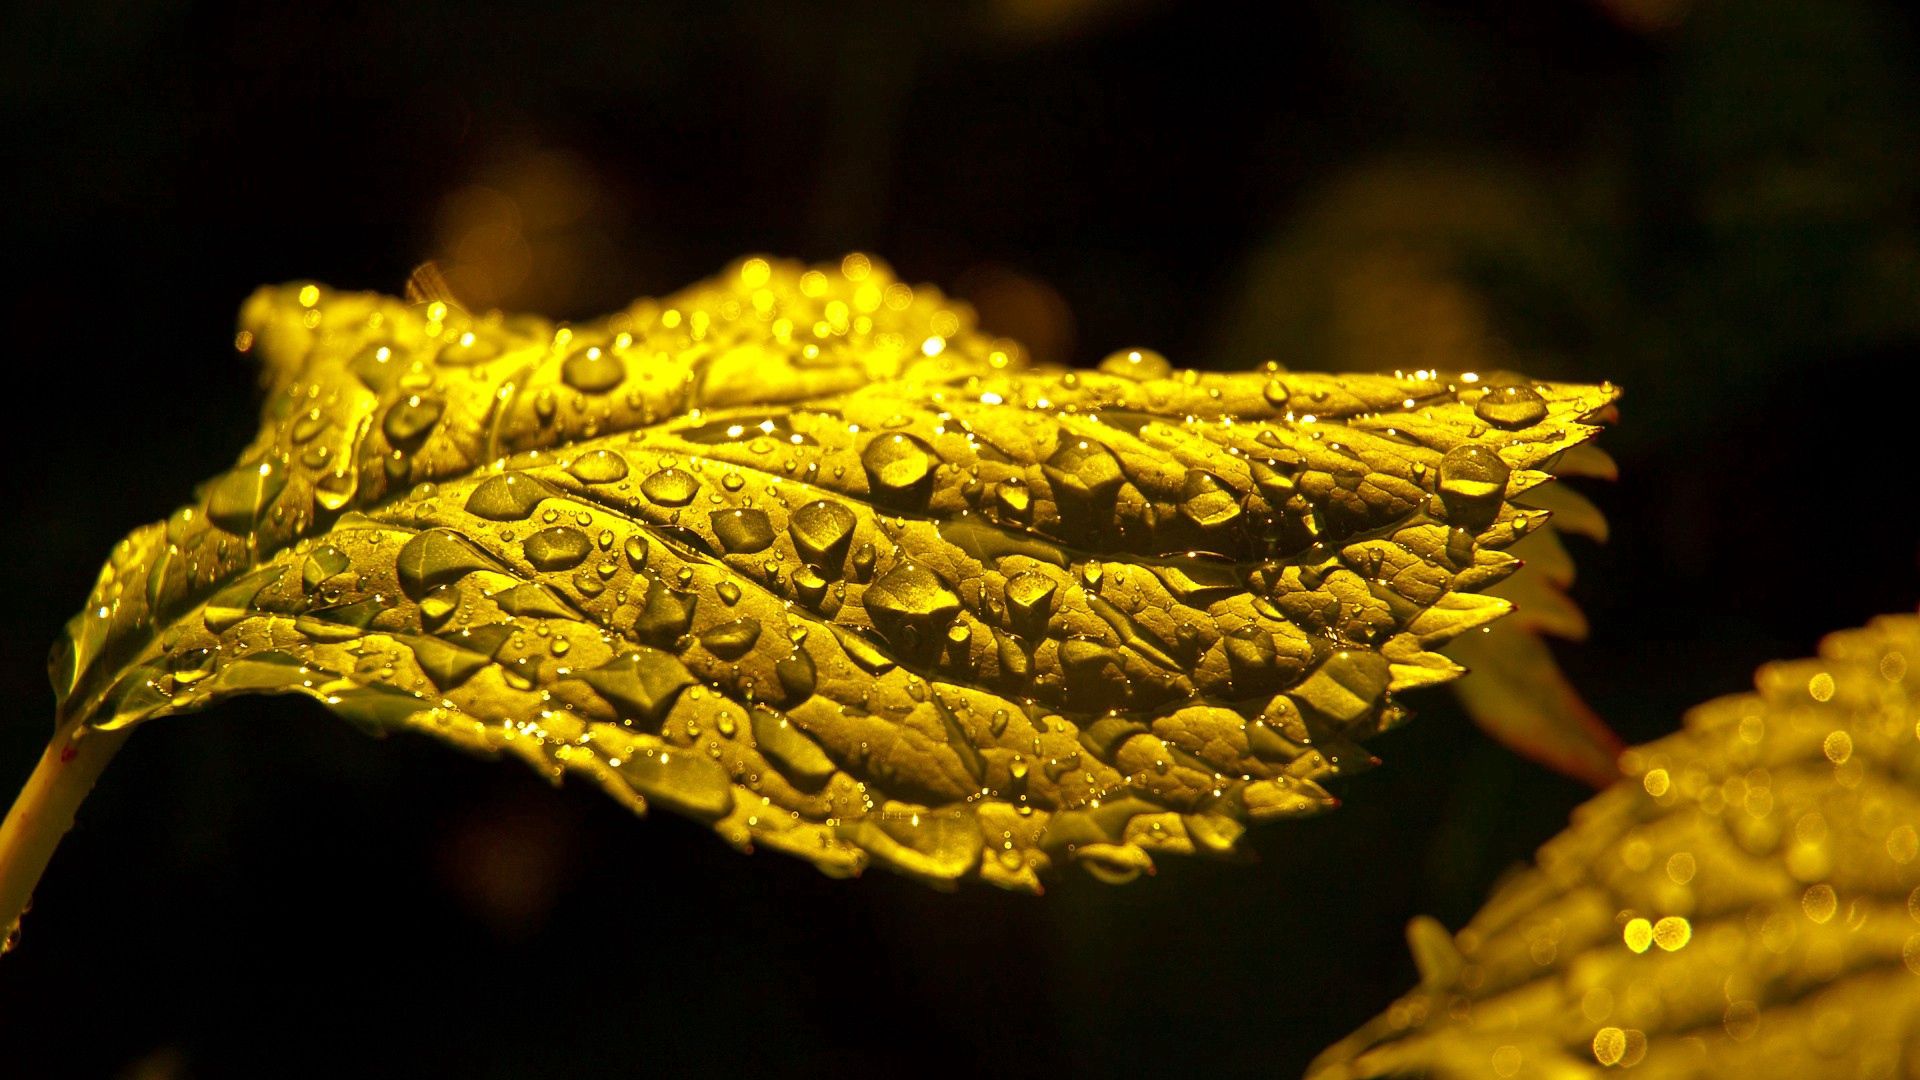 Download wallpaper 1920x1080 leaf, drop, carved, shadow full hd, hdtv